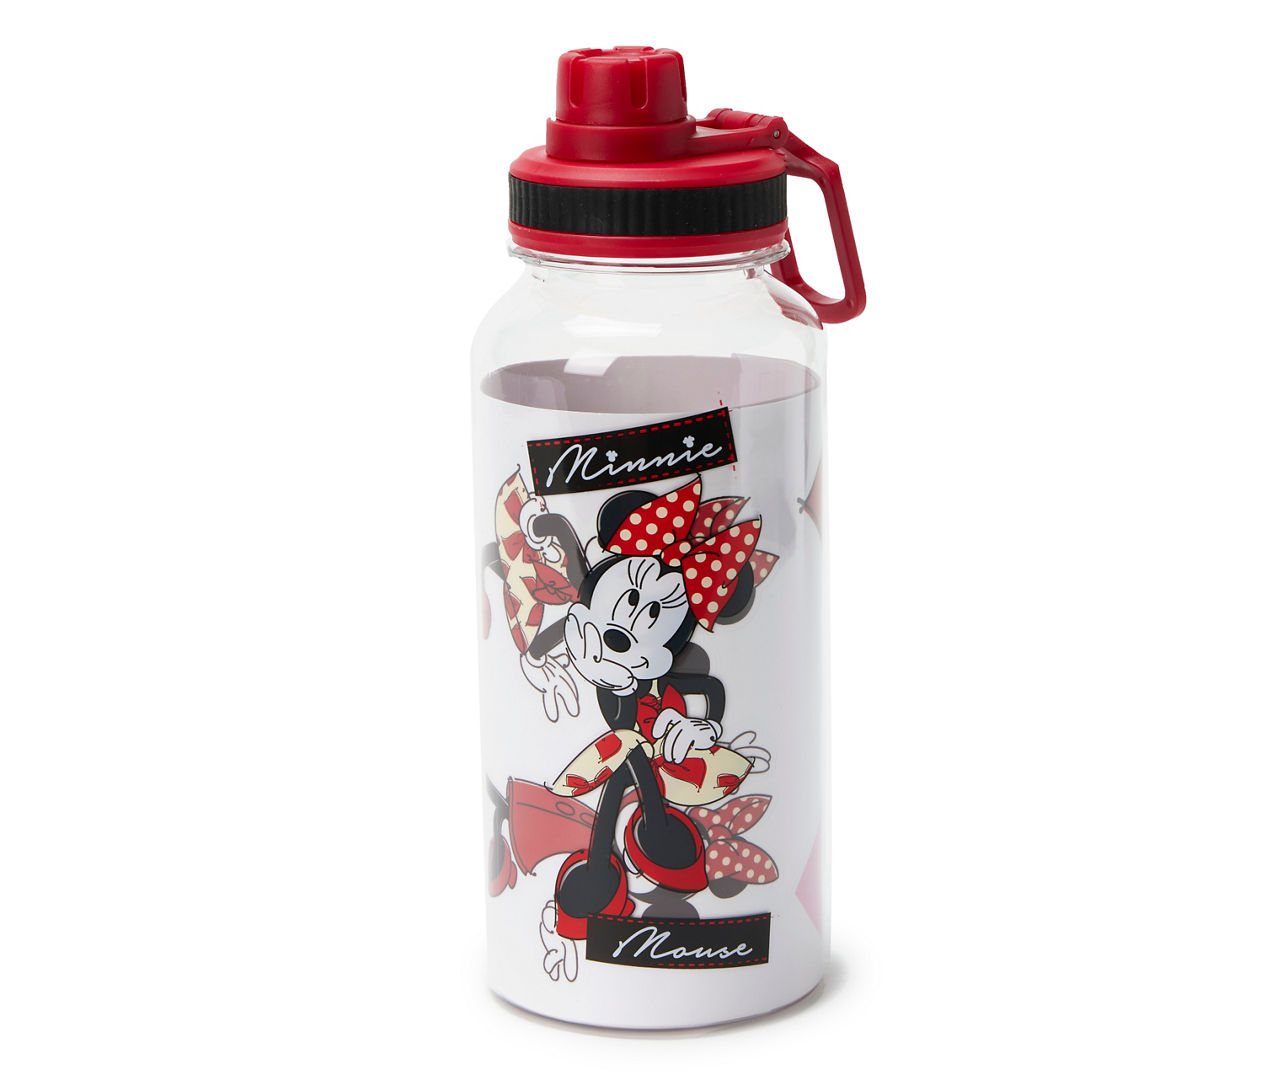 Toddler Minnie Mouse Water Bottleminnie Mouse Water 